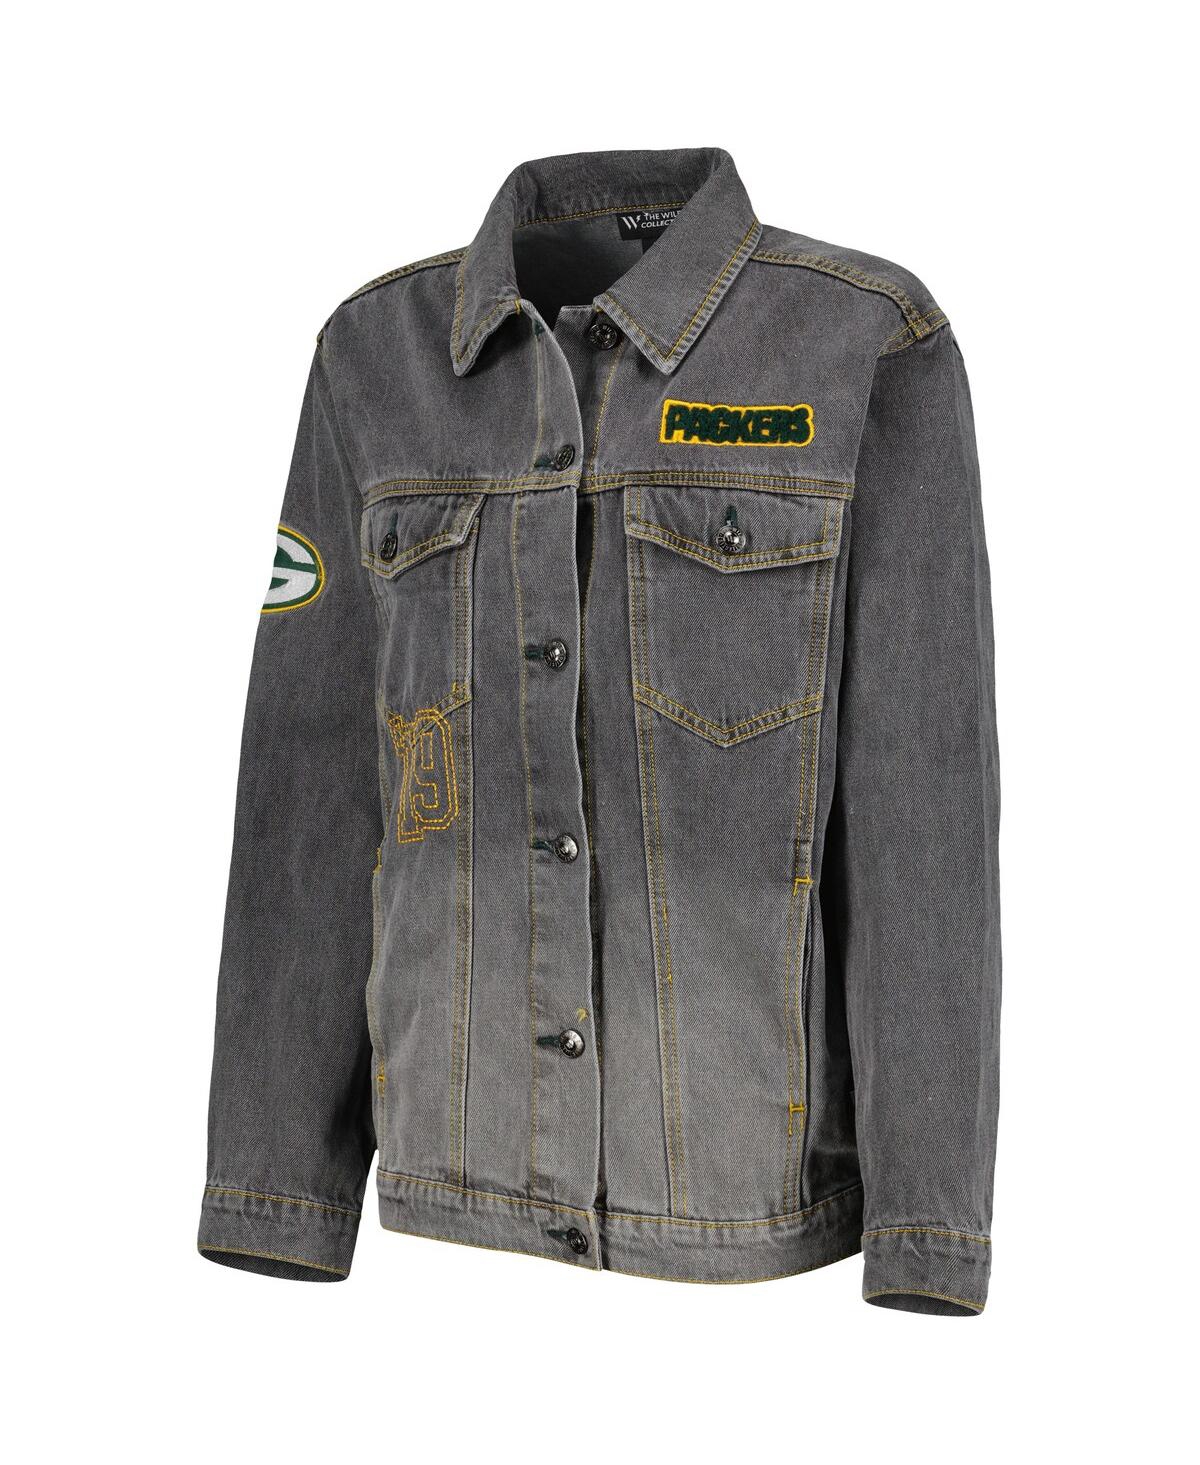 Shop The Wild Collective Women's  Denim Green Bay Packers Faded Button-up Jacket